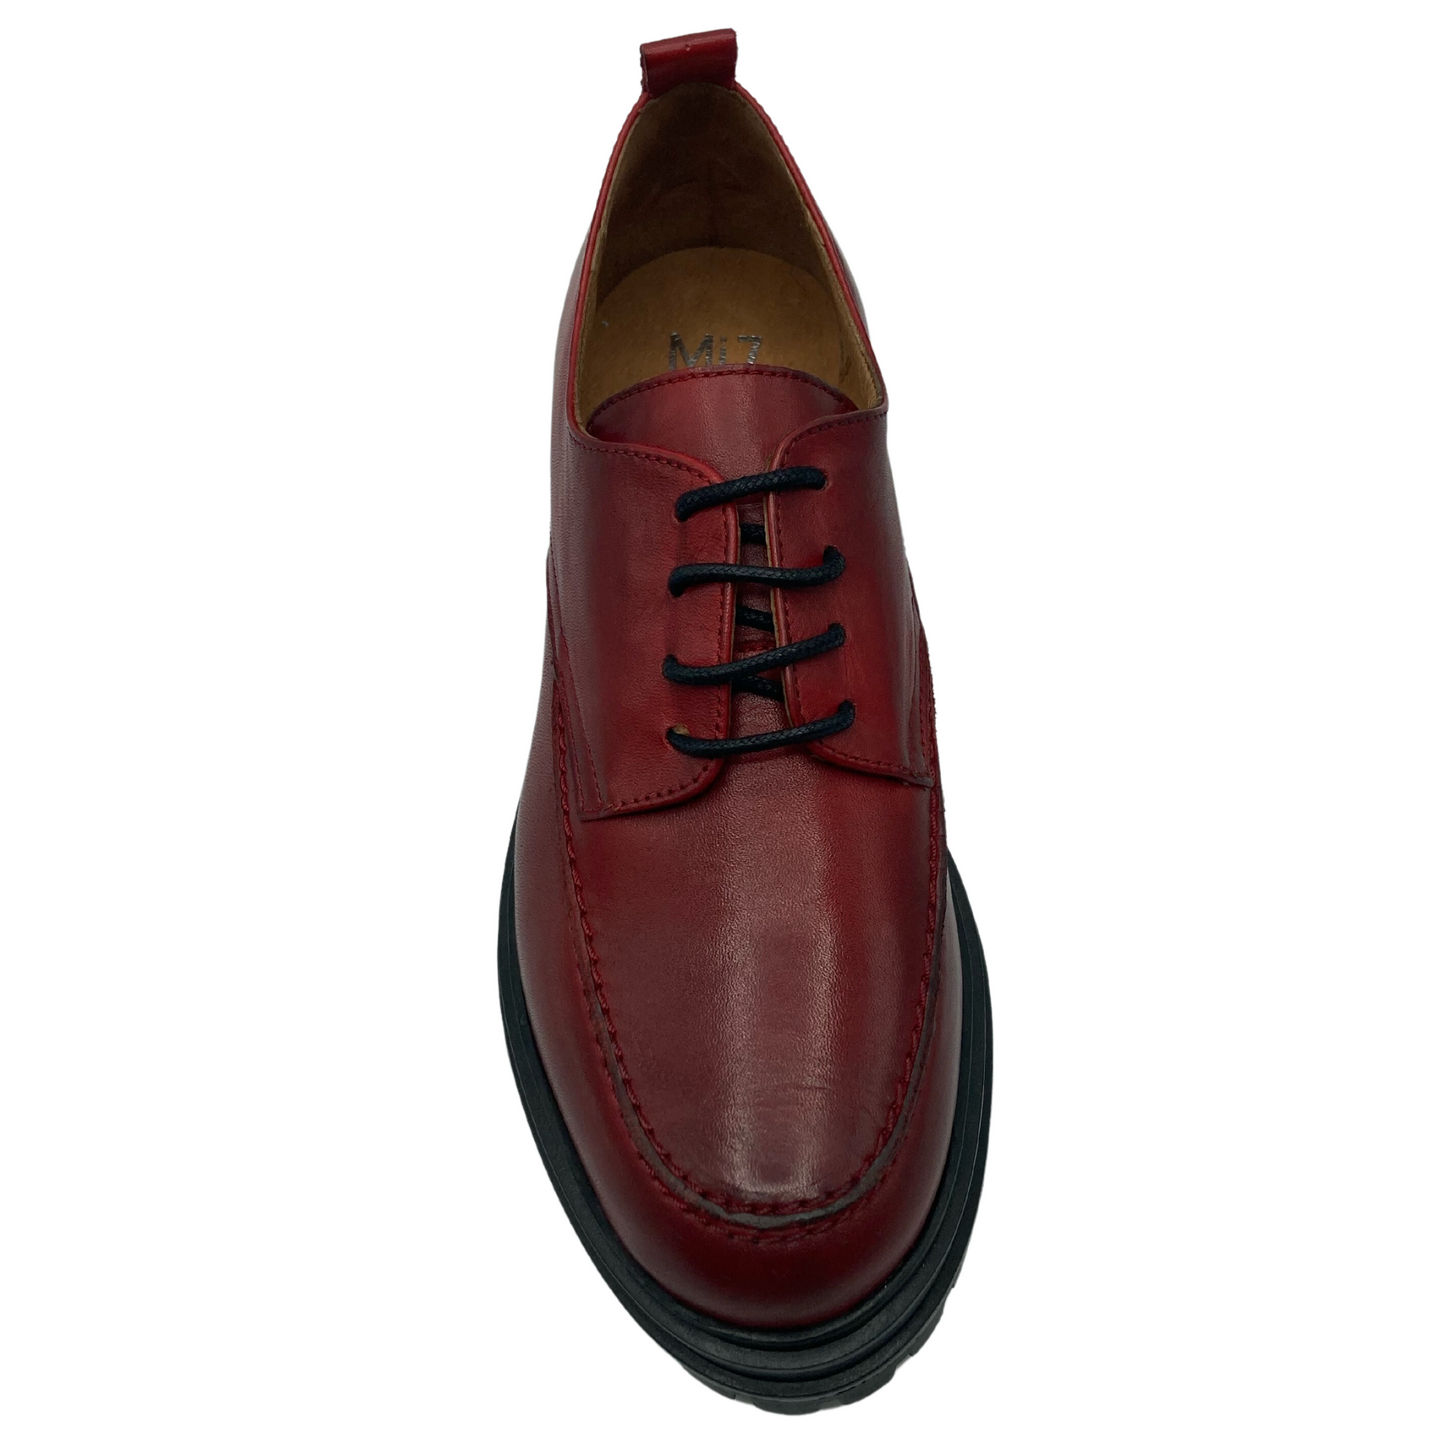 Top view of rounded toe, red, leather loafer with skinny black laces and tan coloured insole